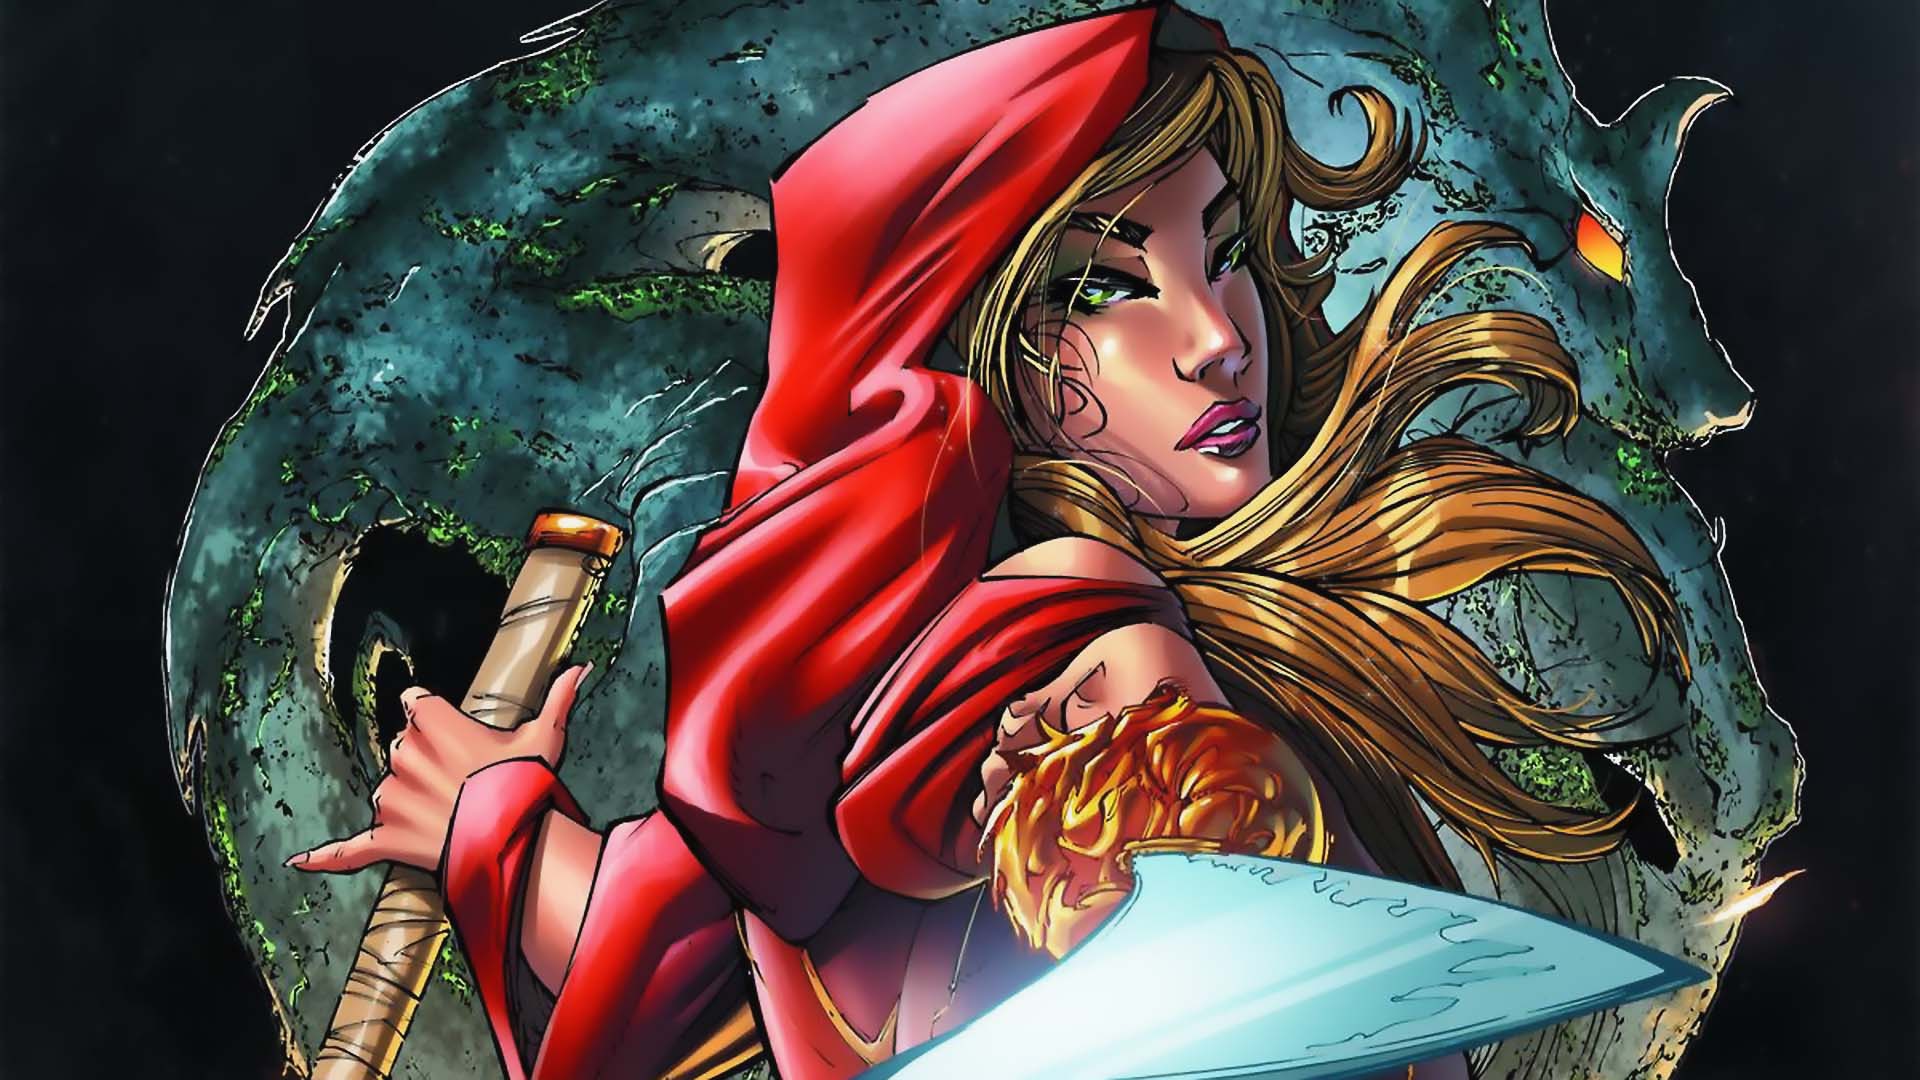 Grimm Fairy Tales: Code Red Wallpaper. Grimm Fairy Tales: Code